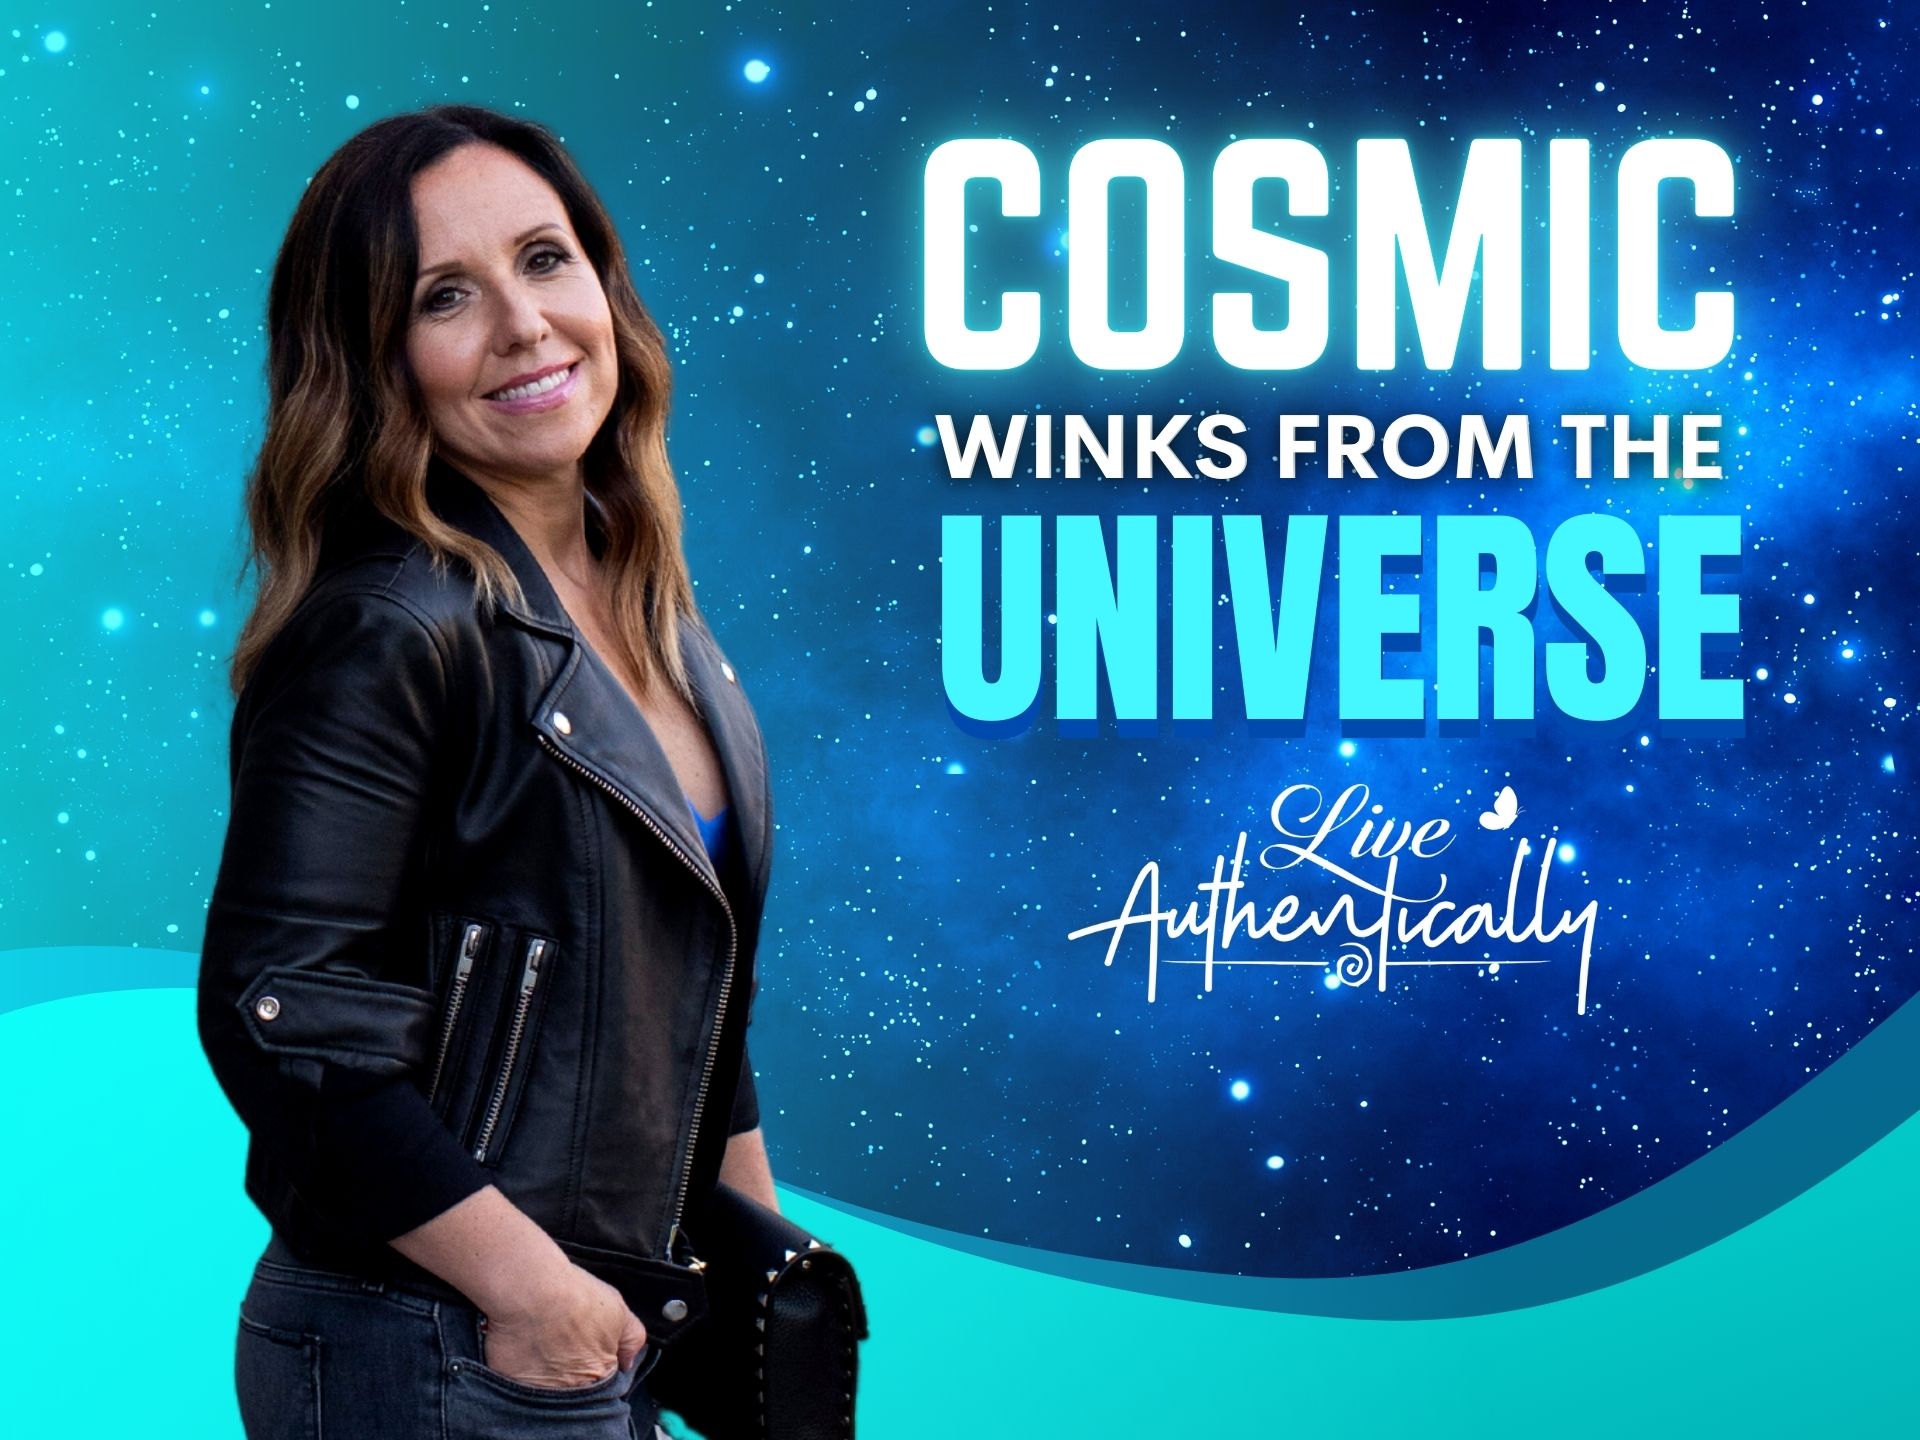 Cosmic Winks from the Universe